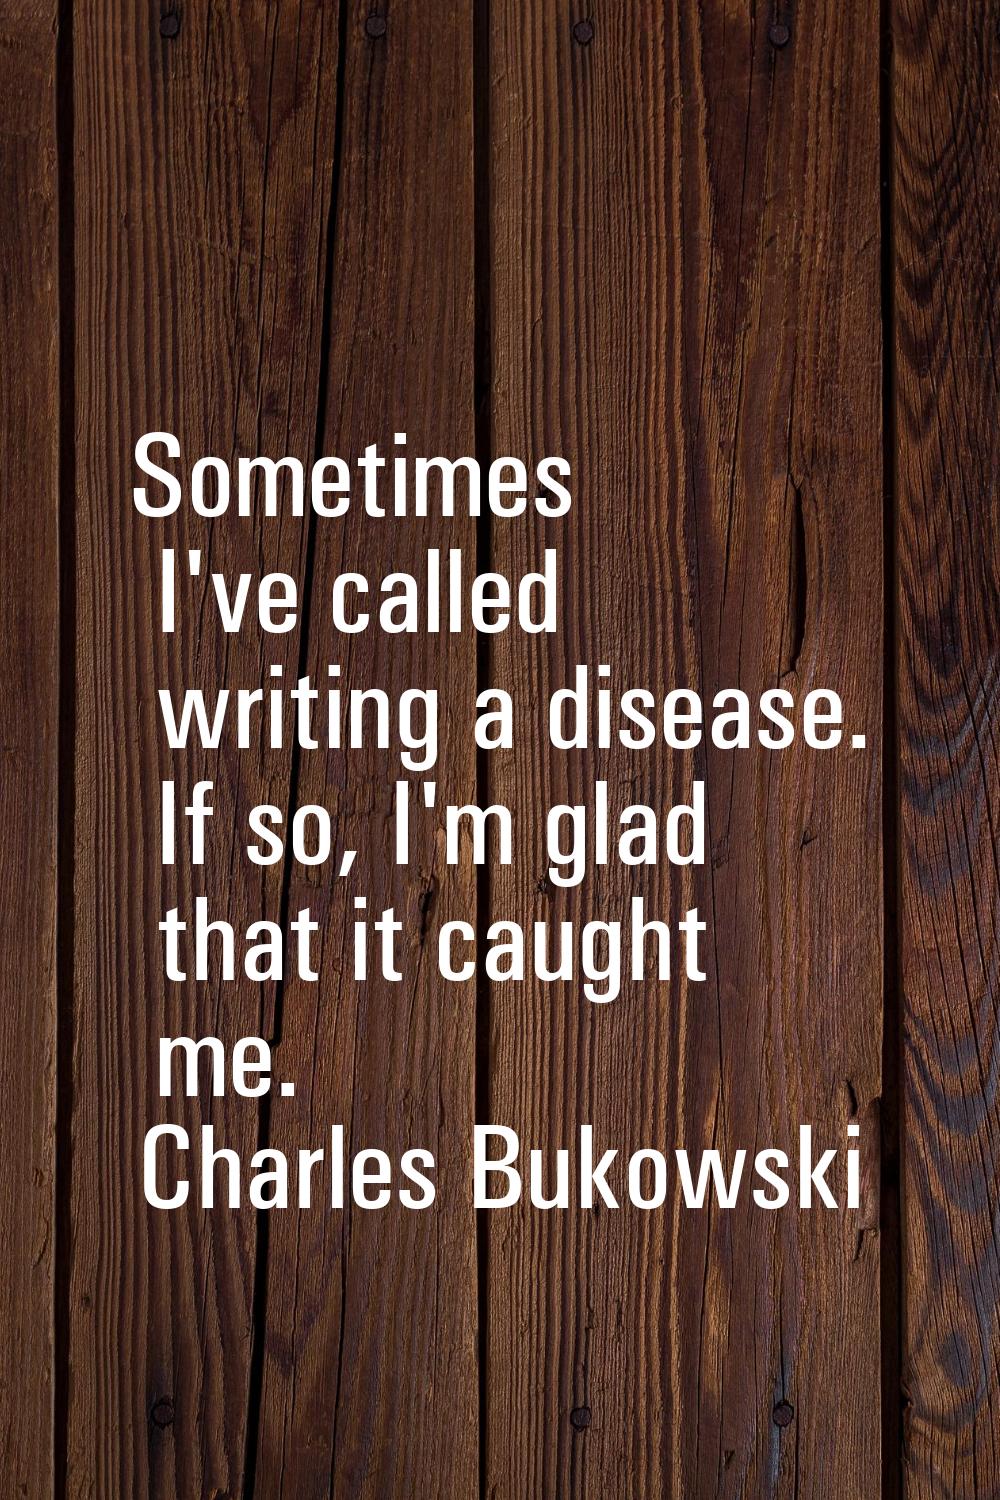 Sometimes I've called writing a disease. If so, I'm glad that it caught me.